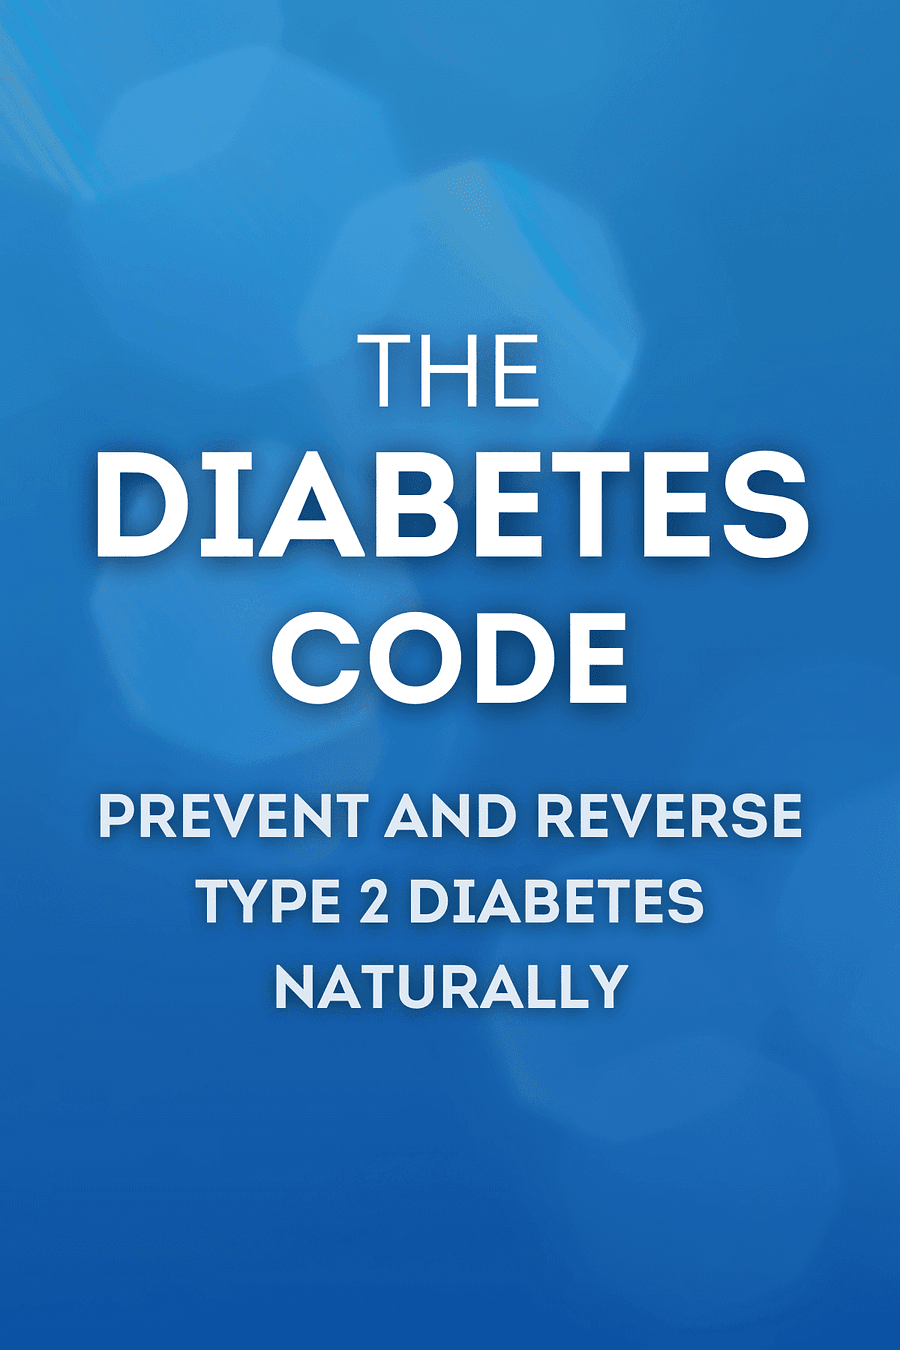 The Diabetes Code by Dr. Jason Fung - Book Summary